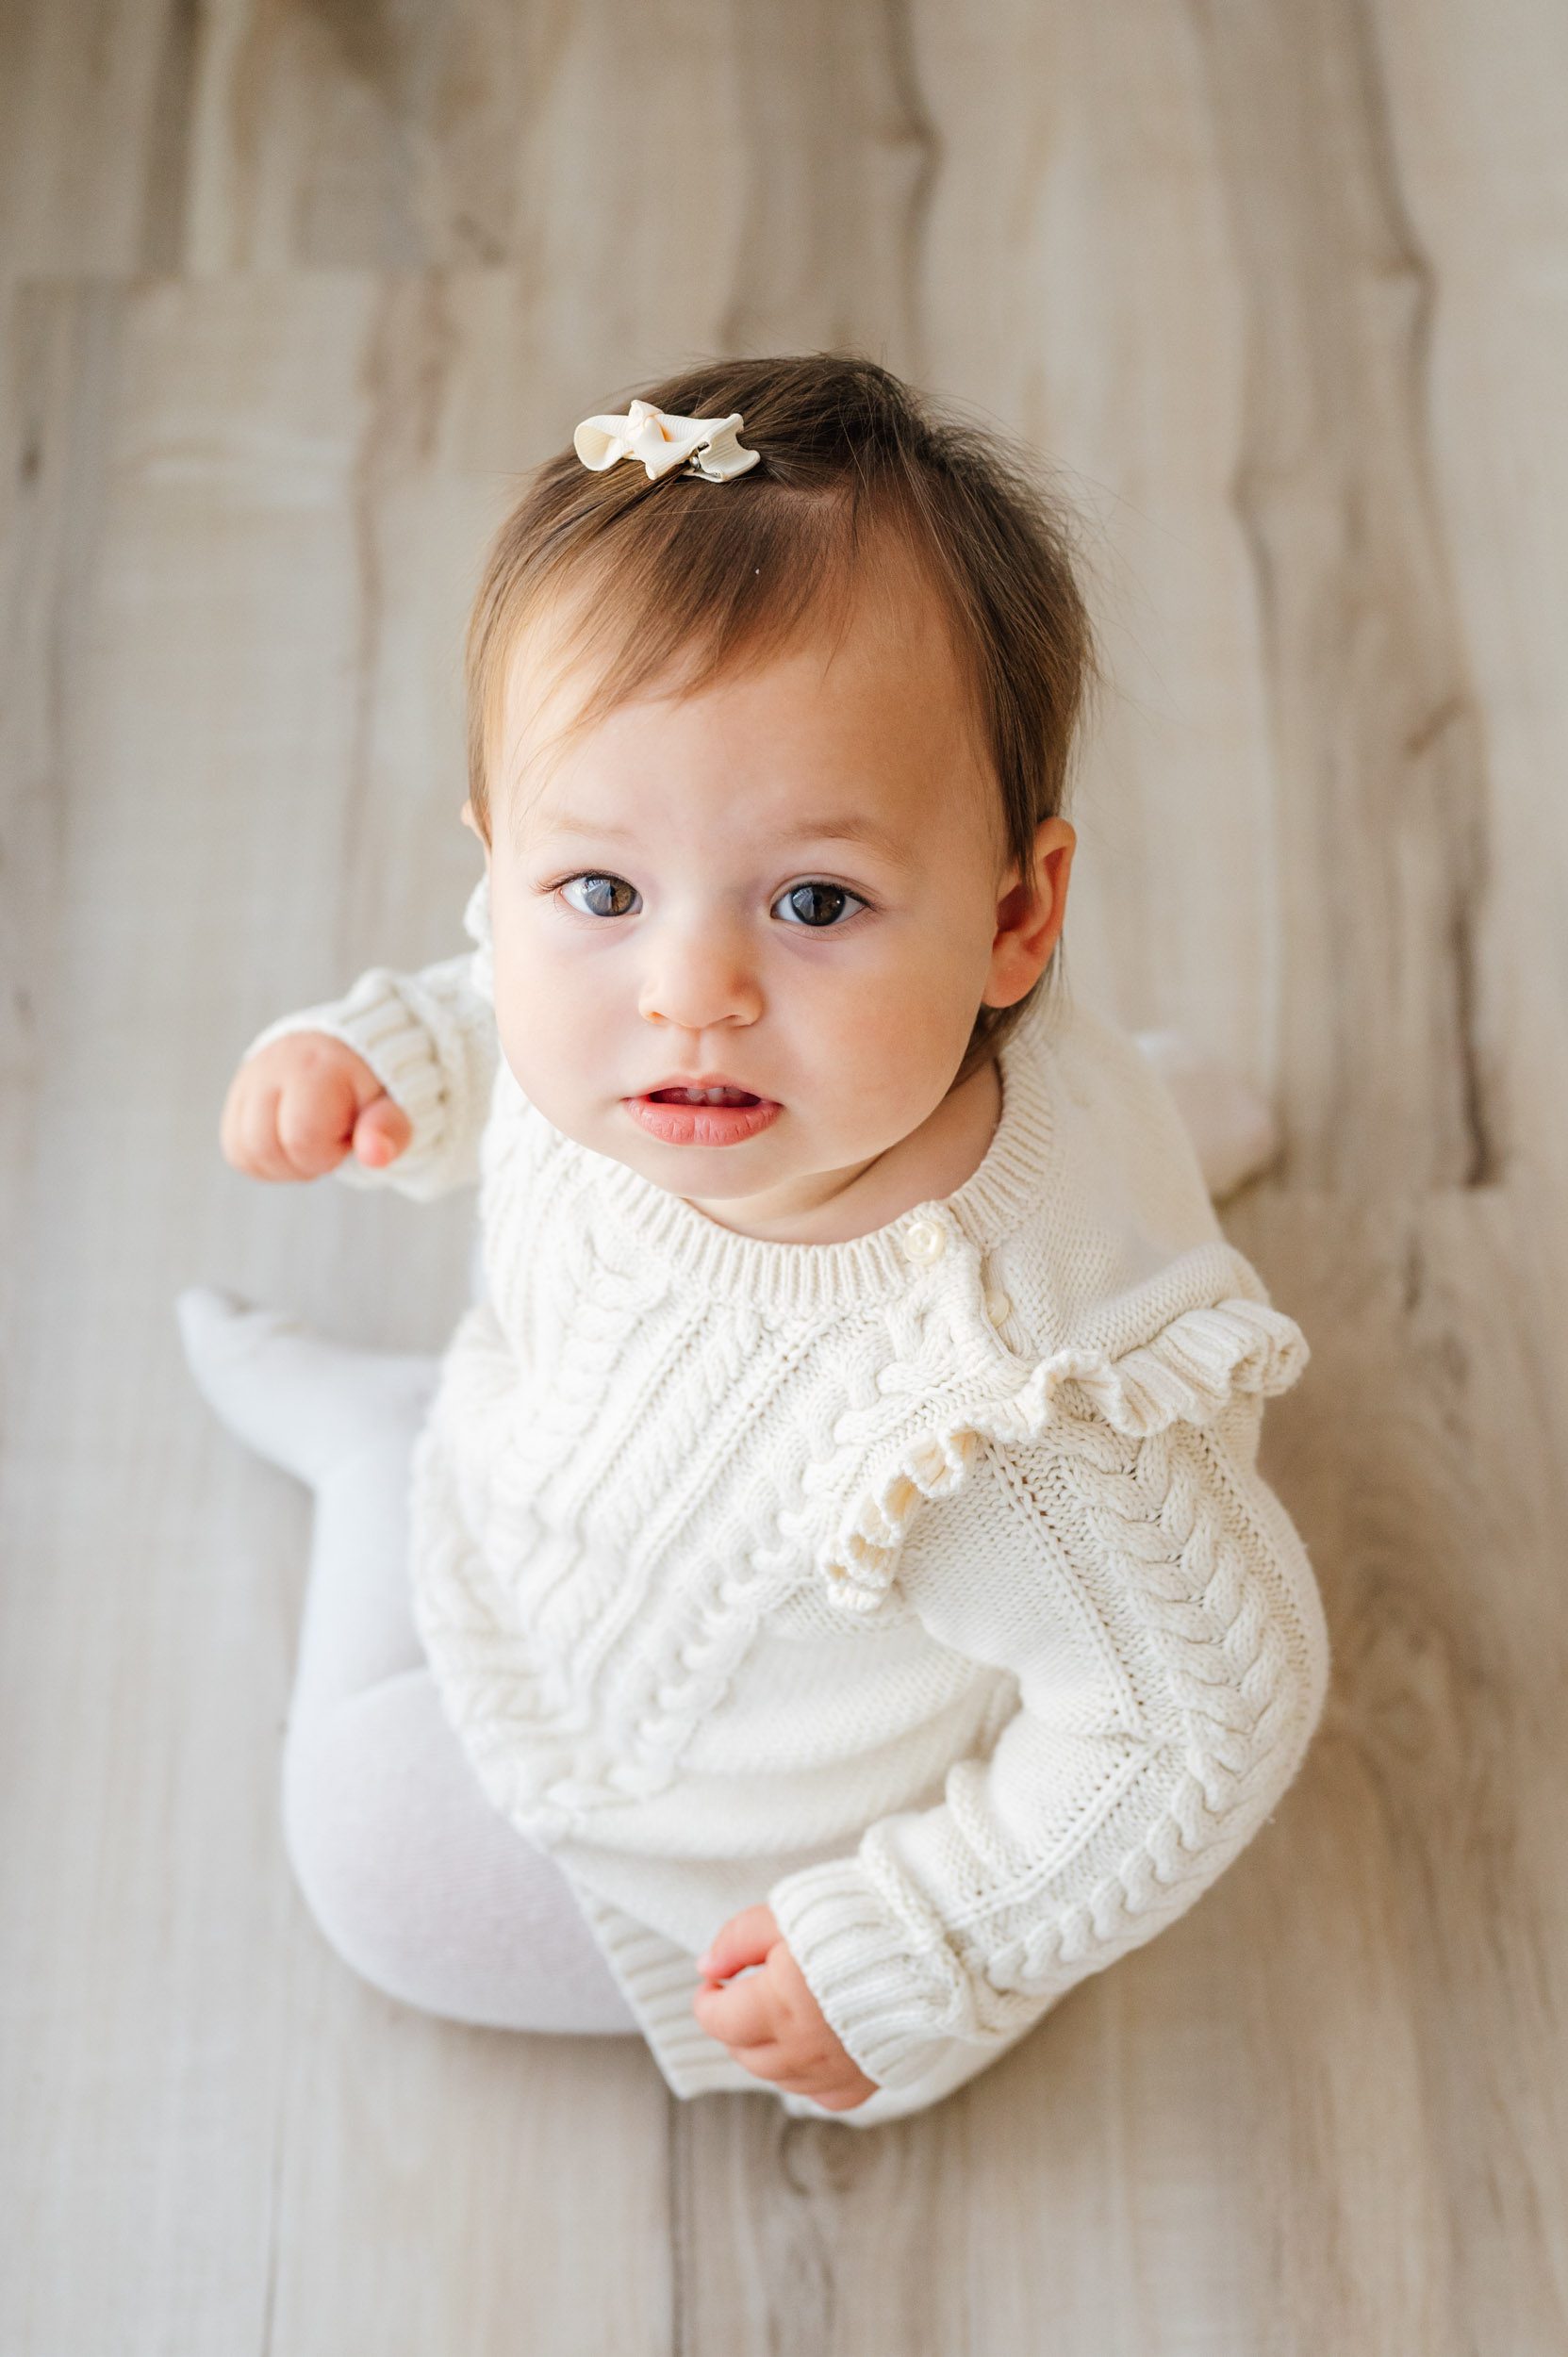 a picture taken from above of a little girl wearing an ivory cable knit dress looking up and gazing directly into the camera during a Pottstown baby photography session